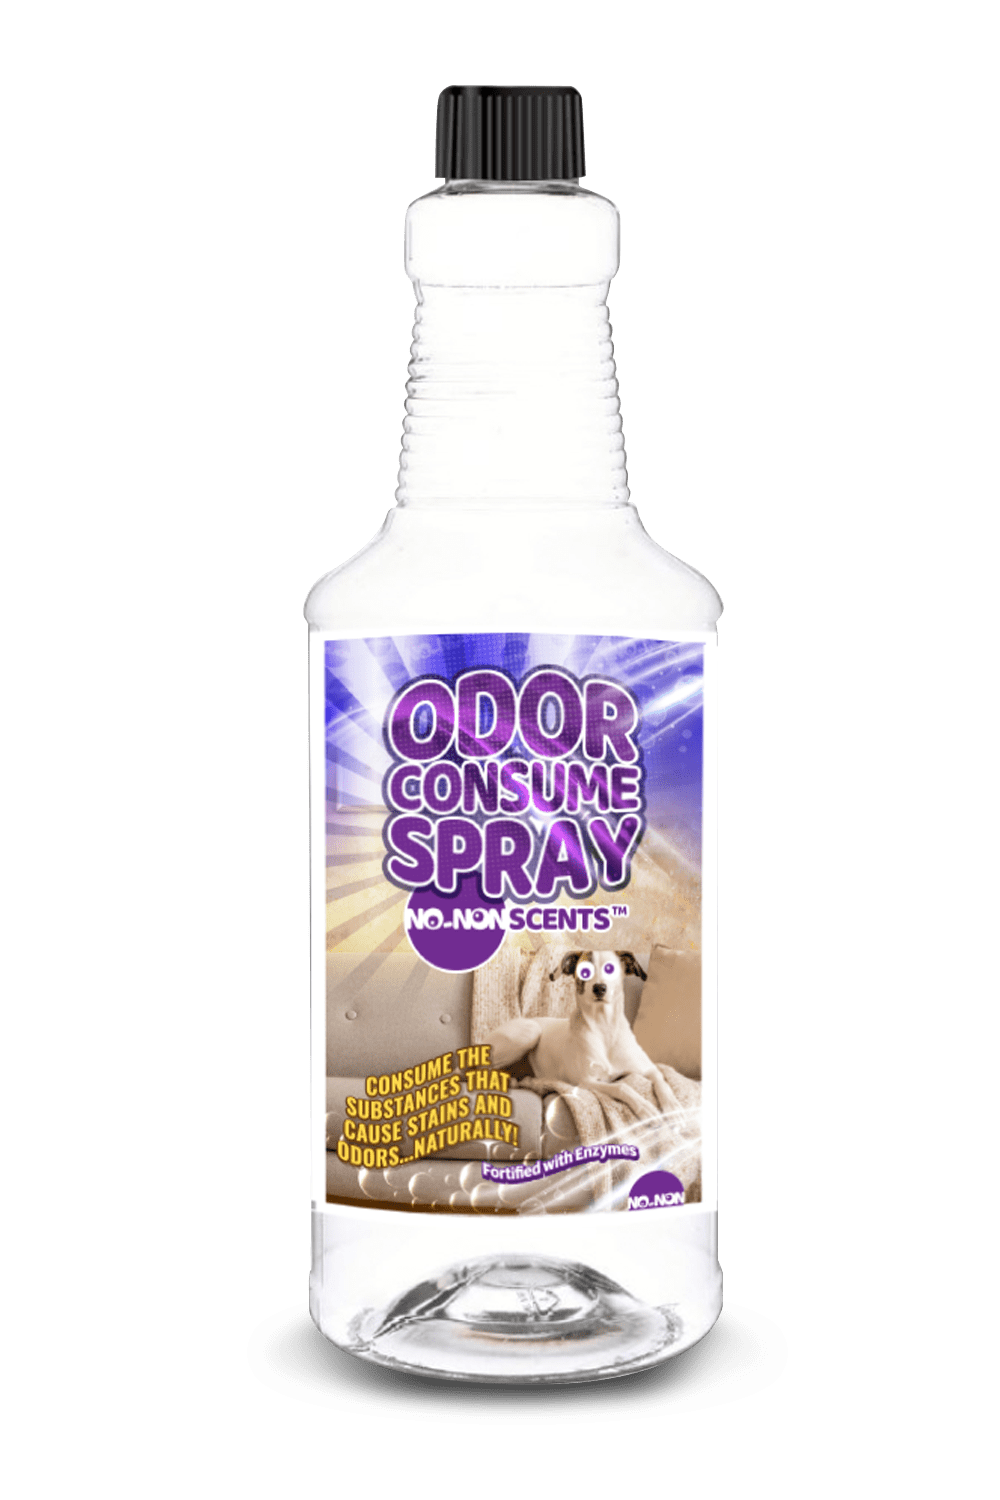 No-NonScents Odor Control & Maintain Deluxe Starter Kit